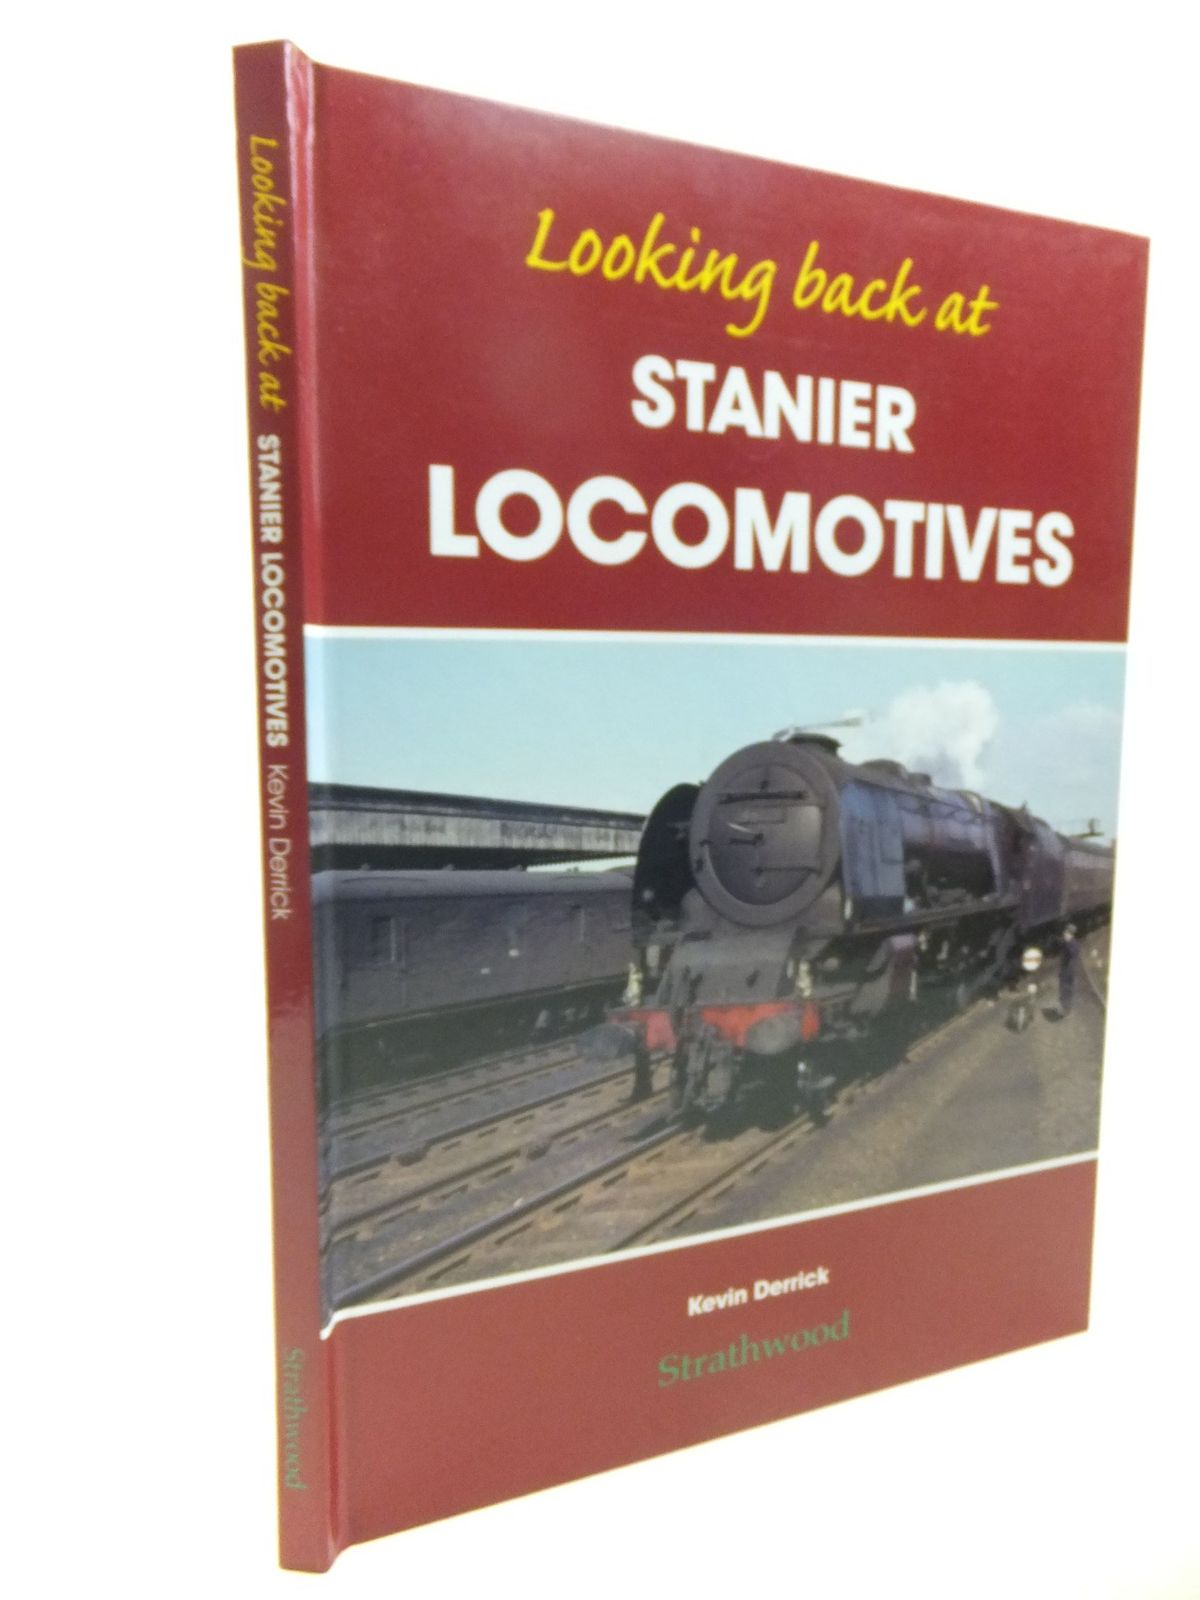 Photo of LOOKING BACK AT STANIER LOCOMOTIVES written by Derrick, Kevin published by Strathwood Ltd (STOCK CODE: 1713615)  for sale by Stella & Rose's Books